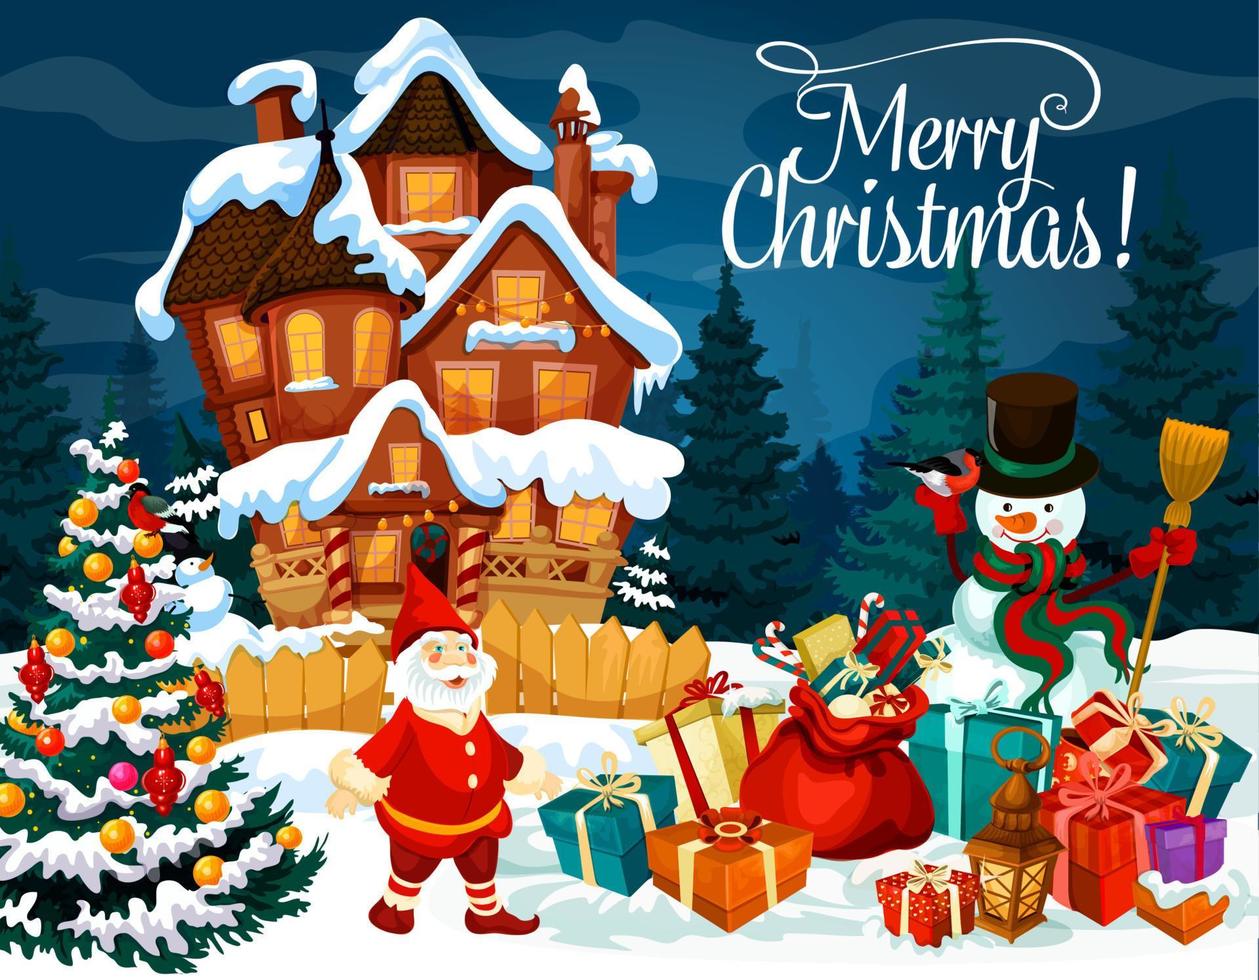 Christmas gifts, snowman and dwarf greeting card vector